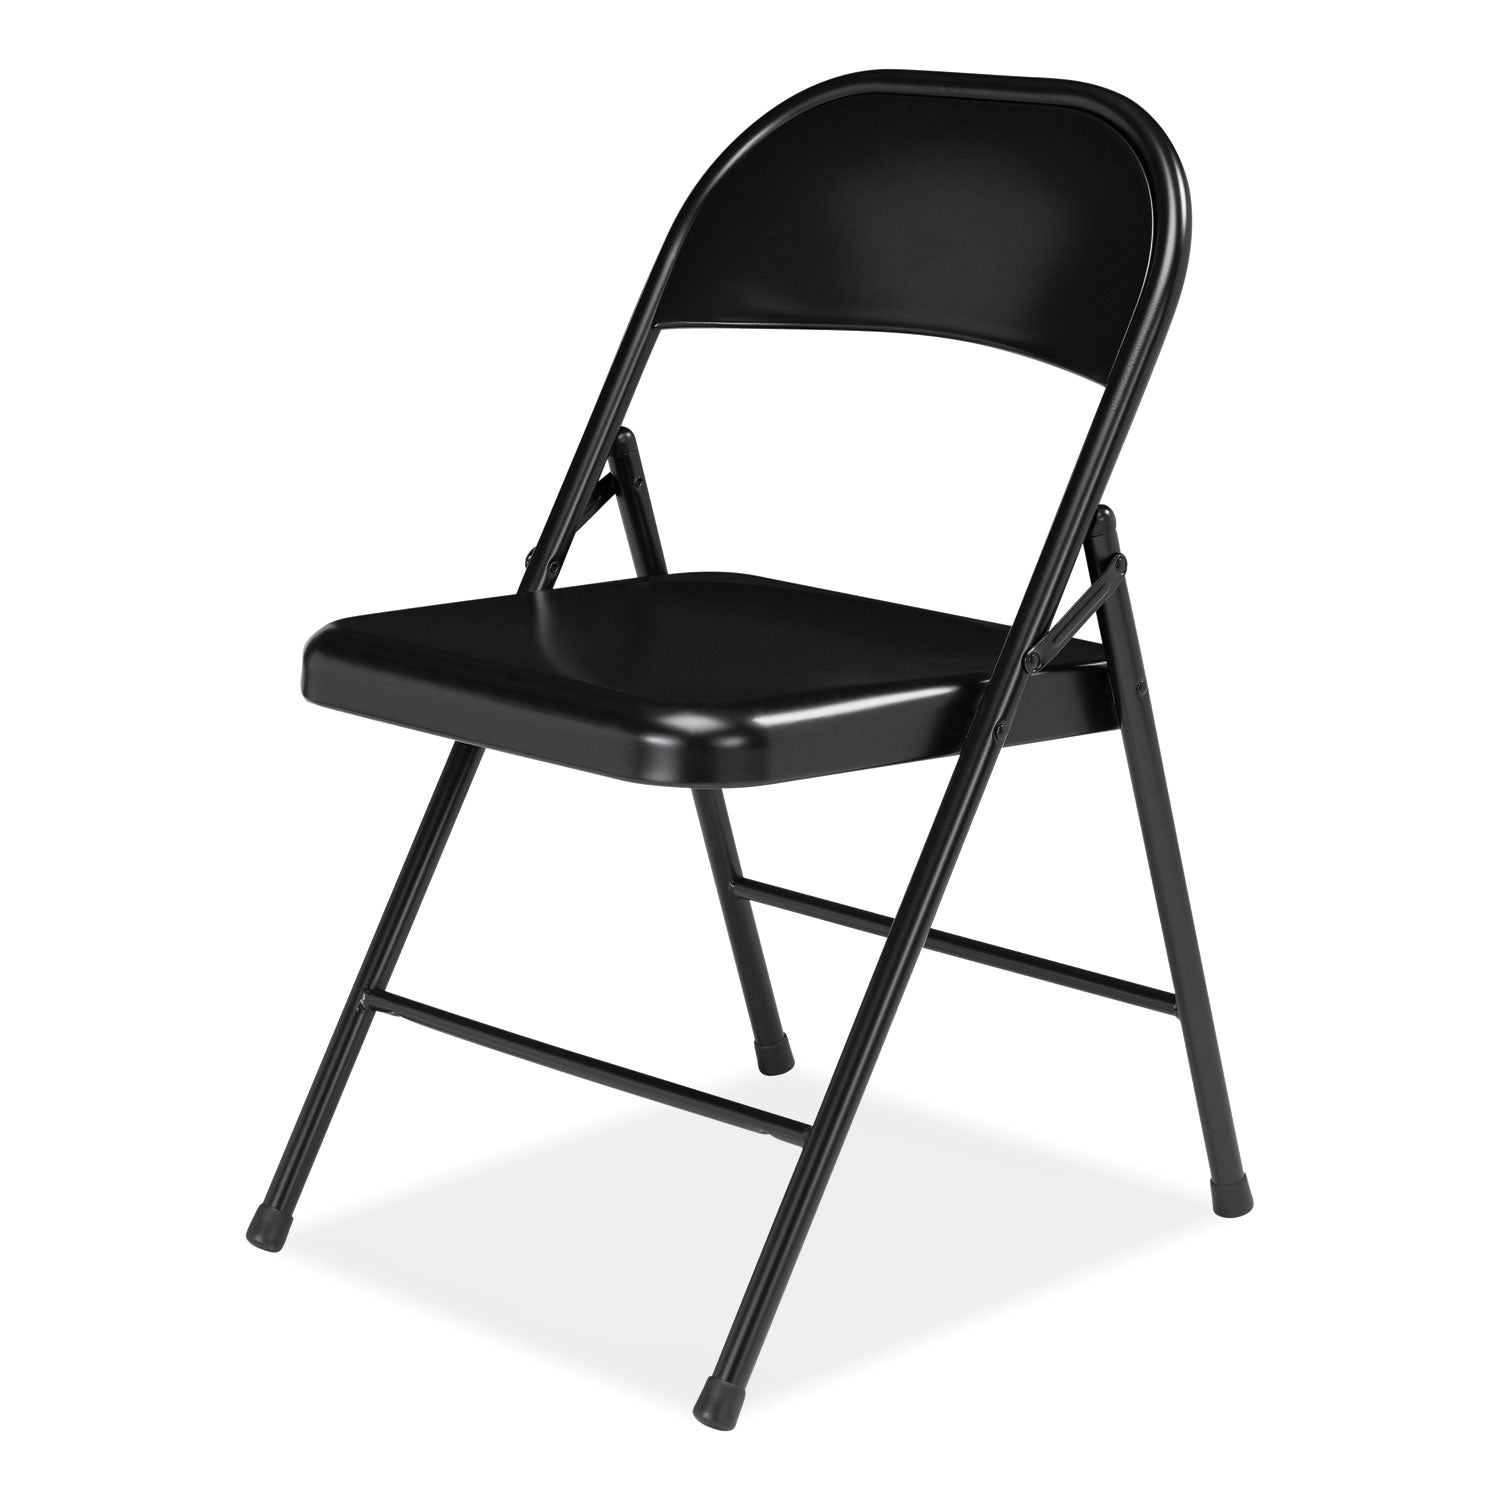 900-series-all-steel-folding-chair-supports-250lb-1775-seat-height-black-seat-back-base-4-ctships-in-1-3-business-days_nps910 - 3